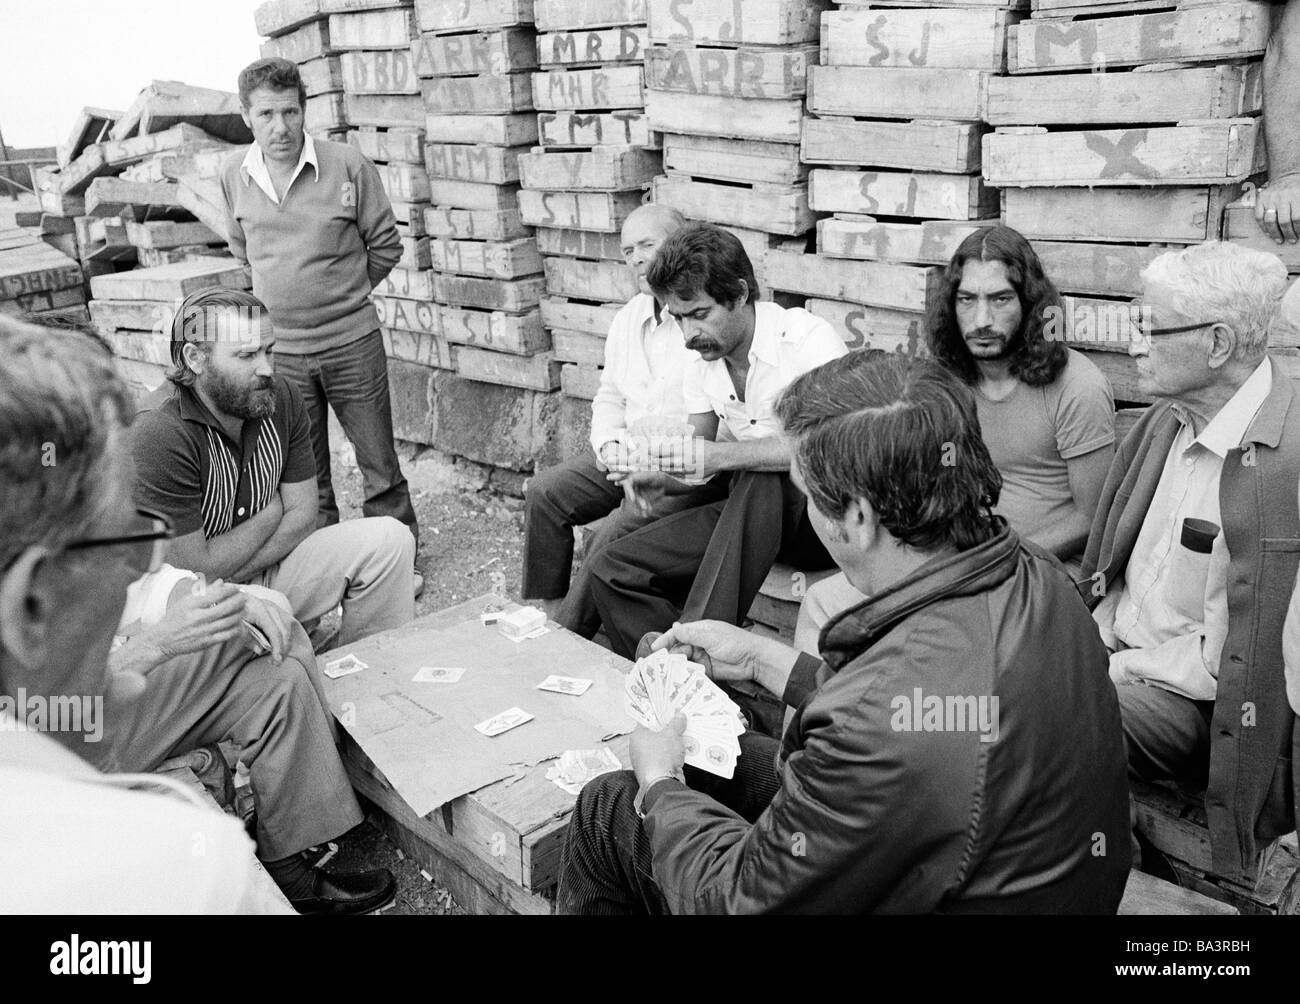 Eighties, black and white photo, several fishermen in the fishing port of Puerto de la Cruz have a break and play cards in front of a batch of wooden boxes, aged 40 to 70 years, Spain, Canary Islands, Canaries, Tenerife Stock Photo